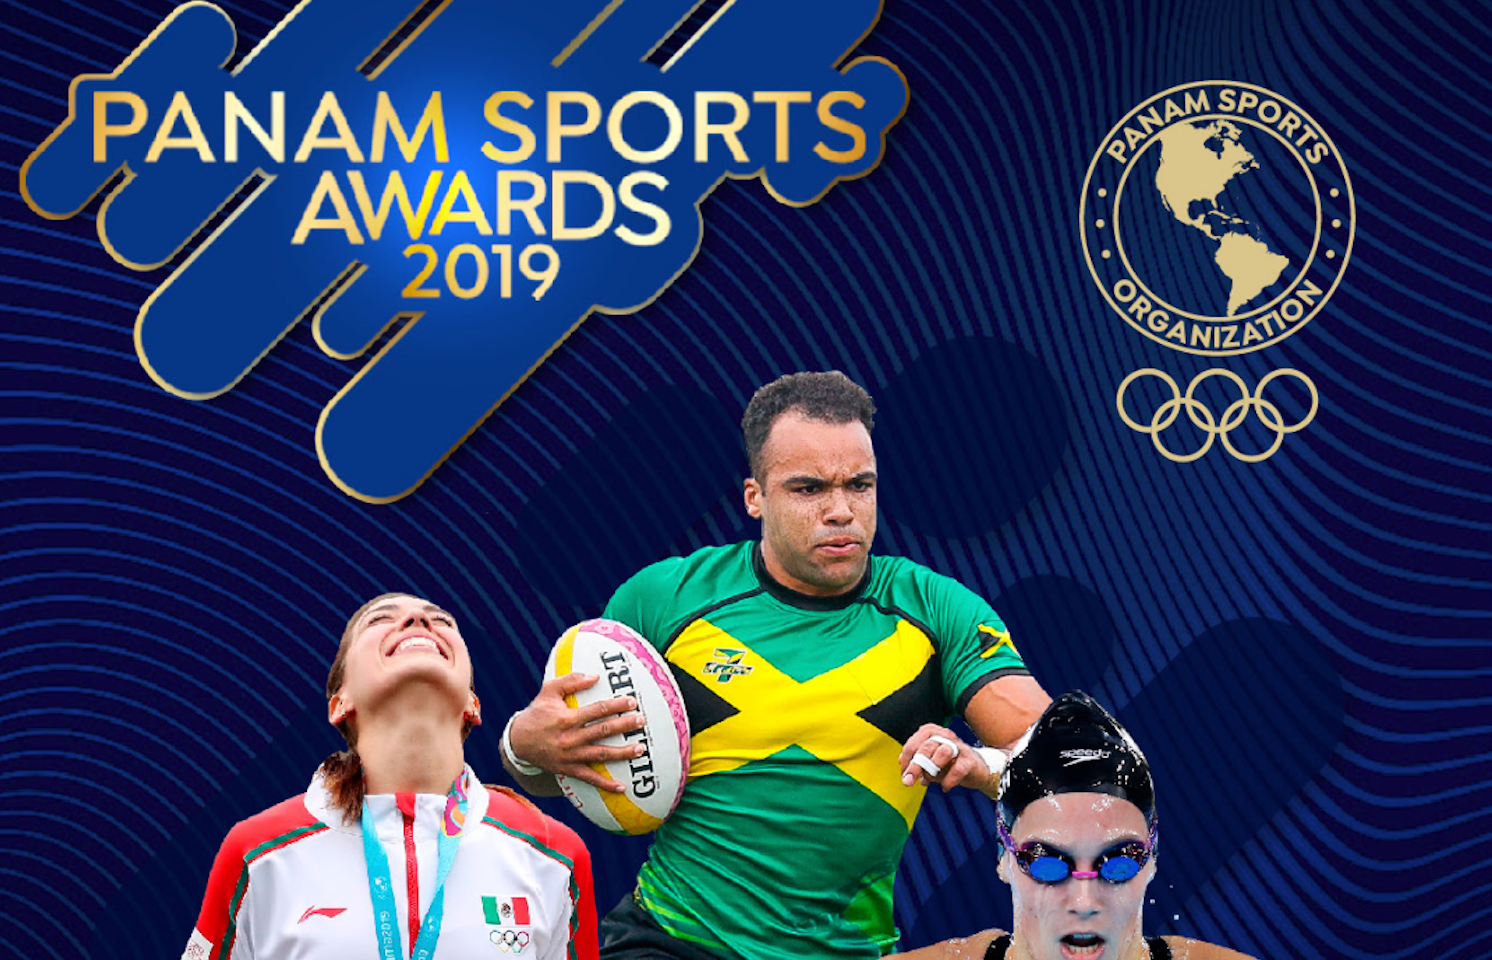 Best male and female athletes to be crowned at inaugural Panam Sports Awards